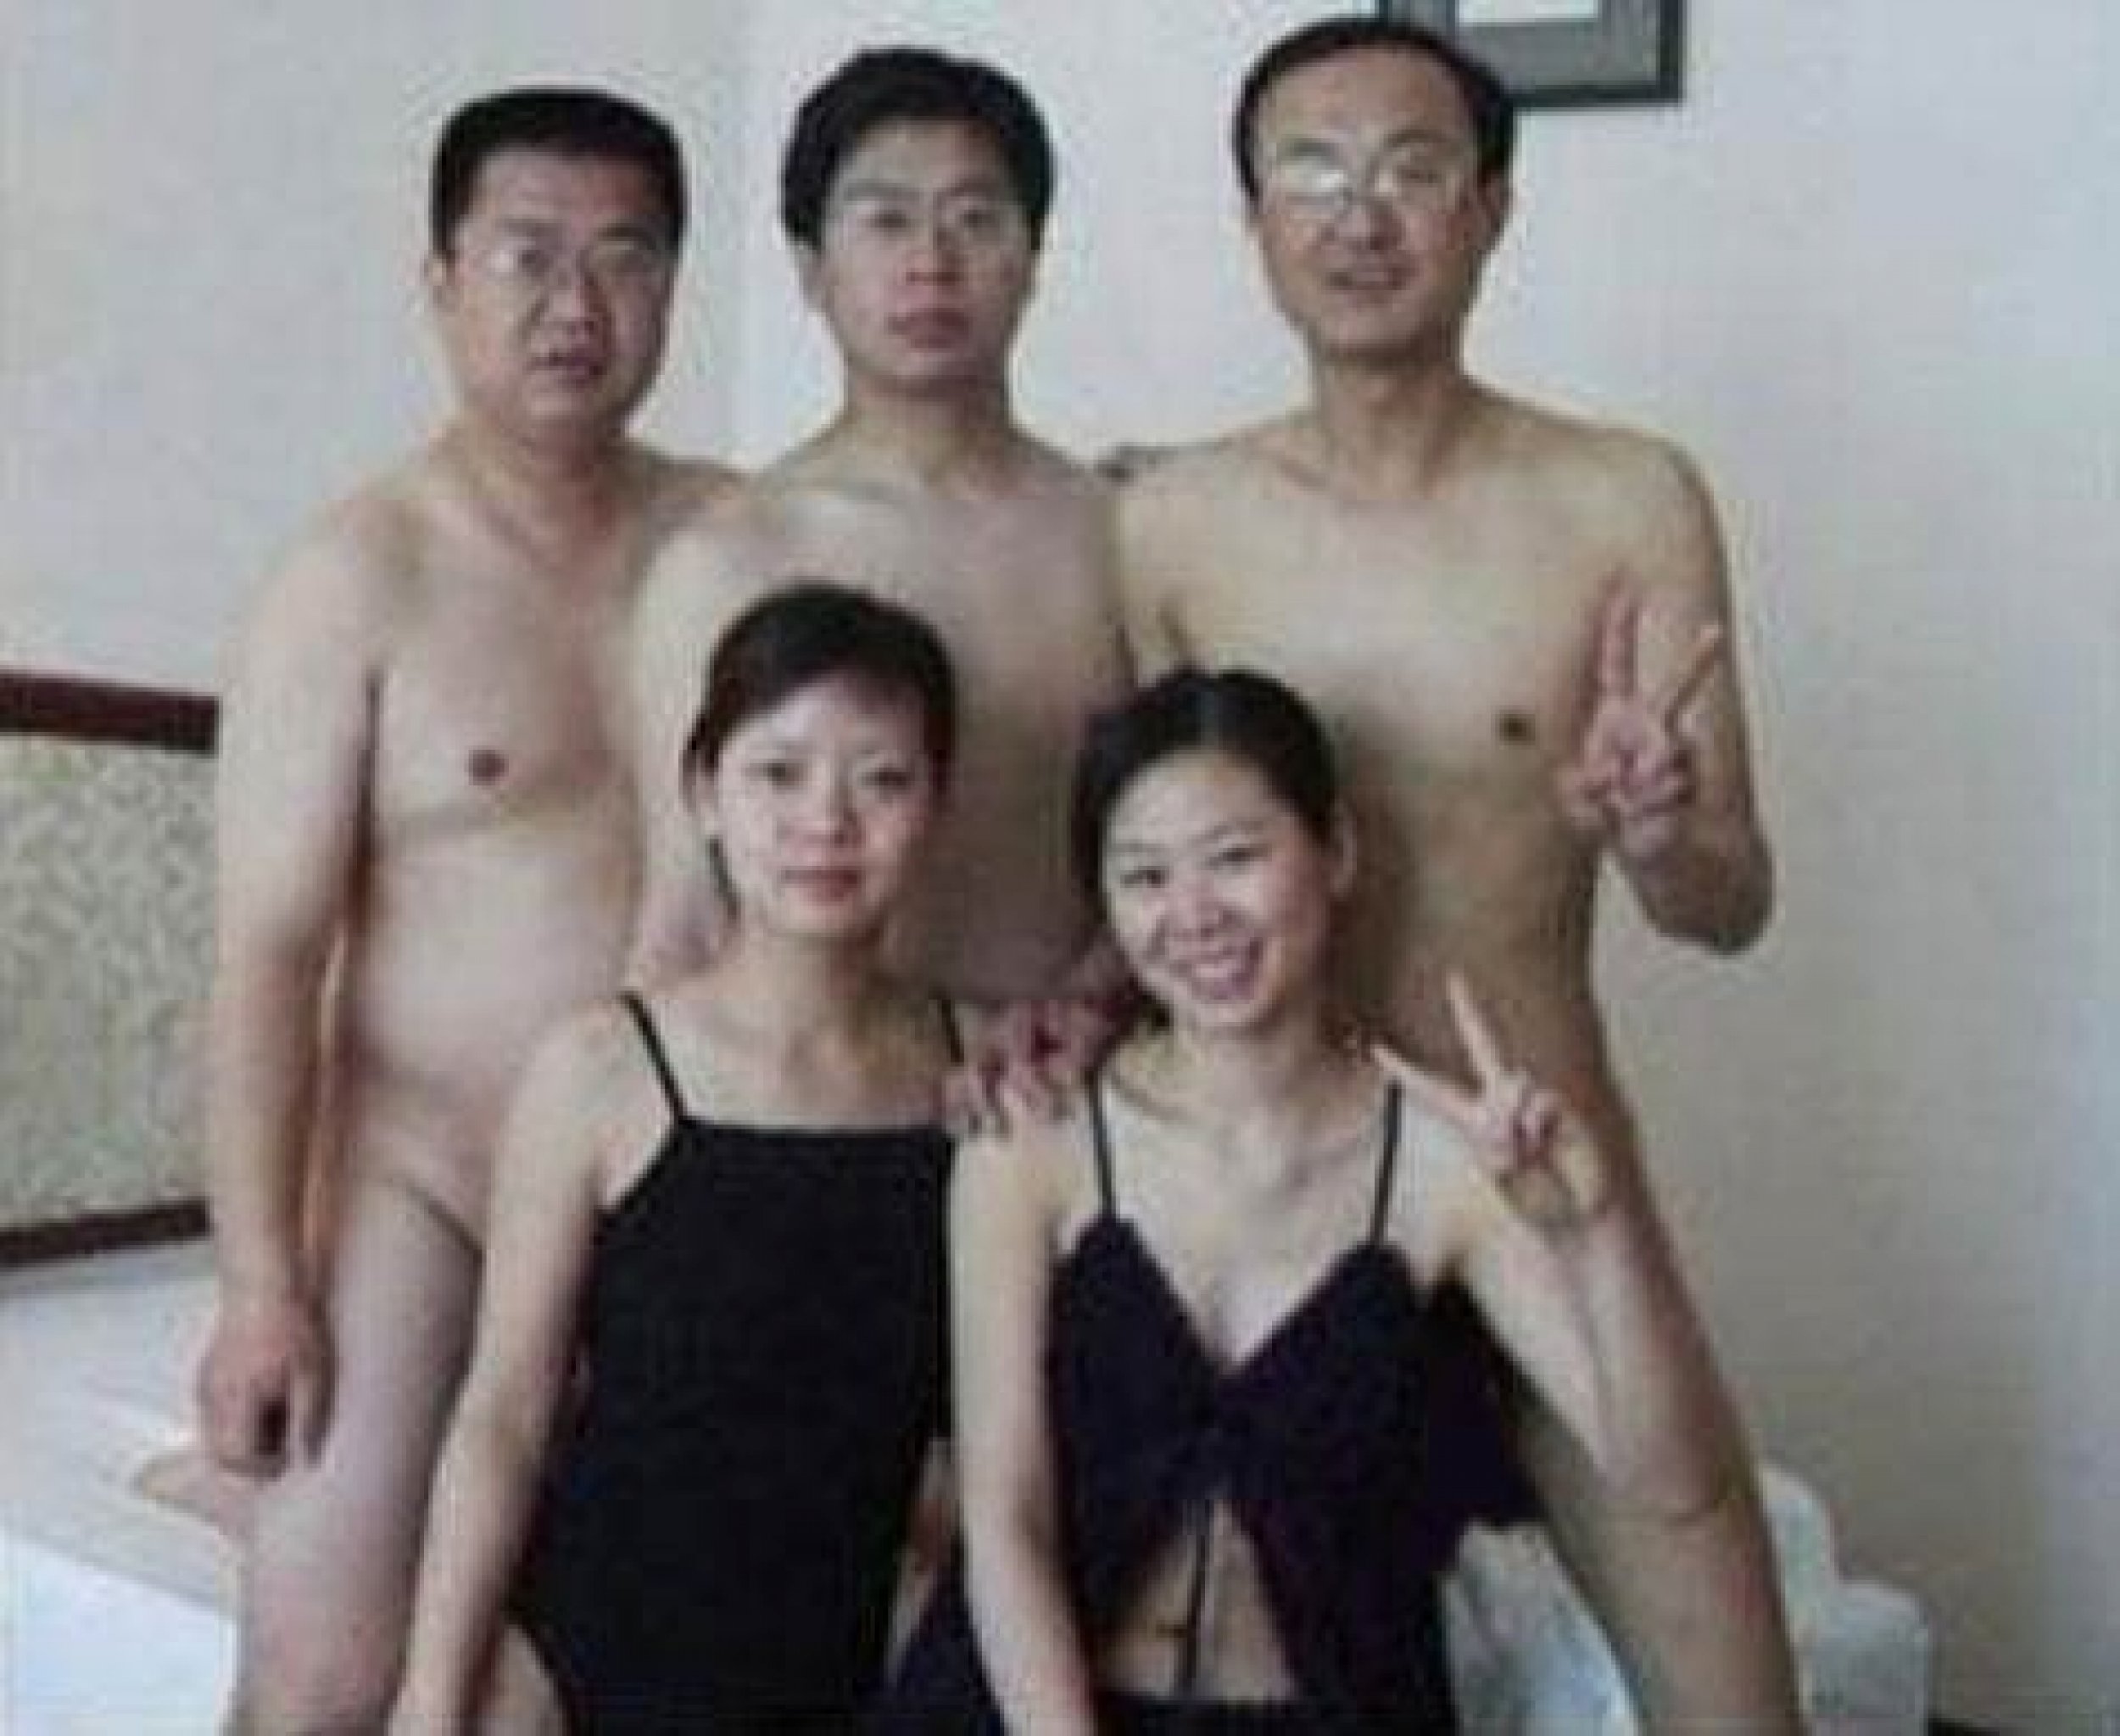 Over 100 Photos Go Viral Online of A Sex Orgy Allegedly Featuring High-Ranking Chinese Officials IBTimes